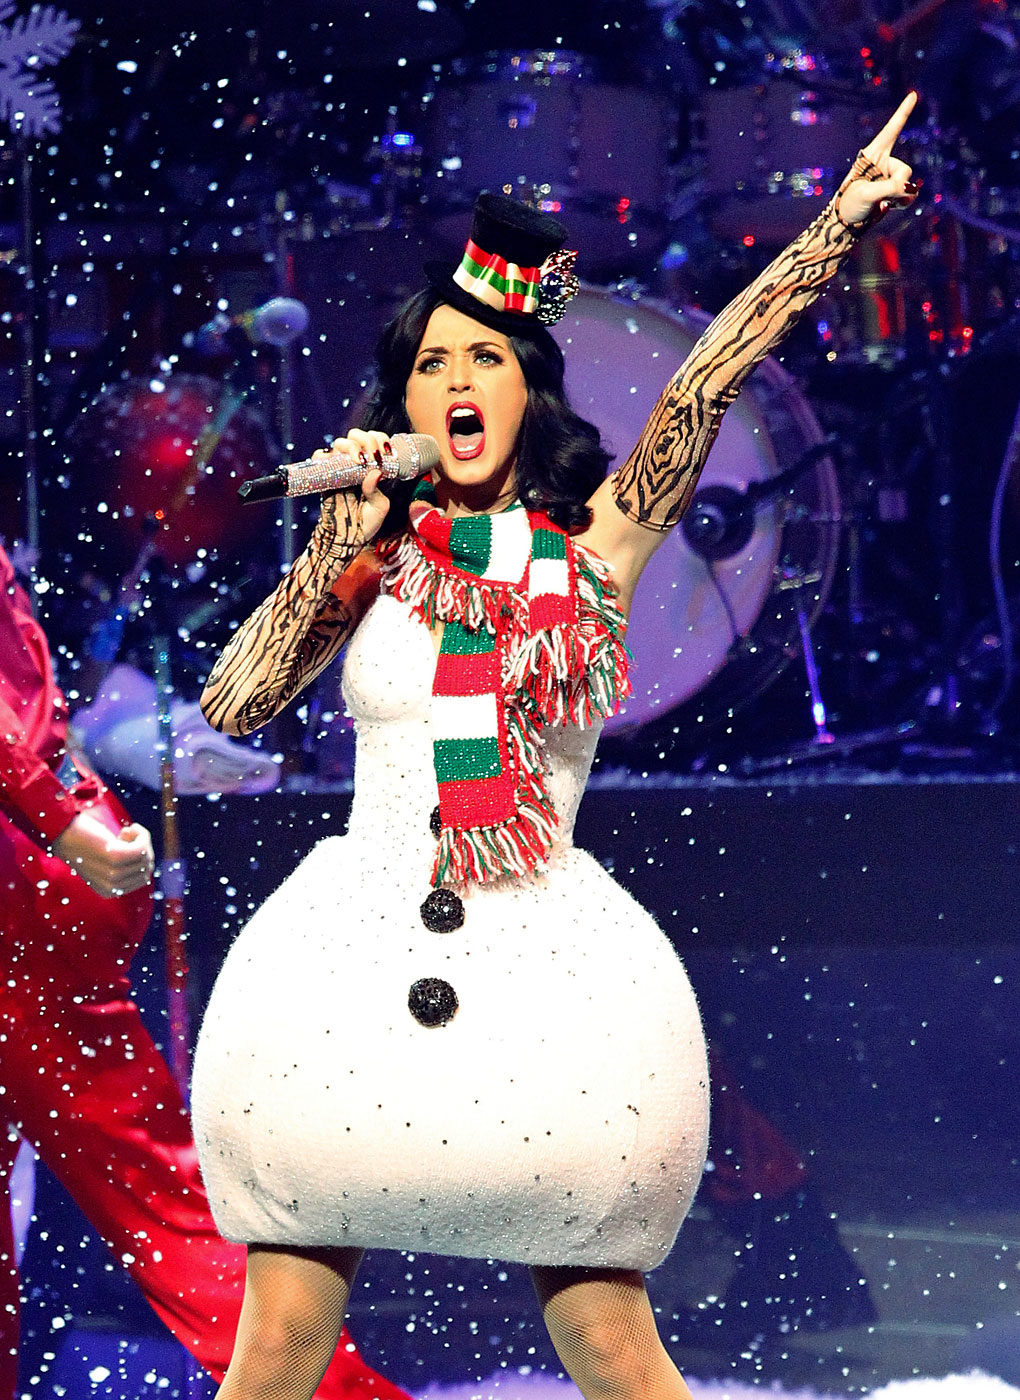 Katy Perry performs at the KIIS FM's Jingle Ball concert in Los Angeles